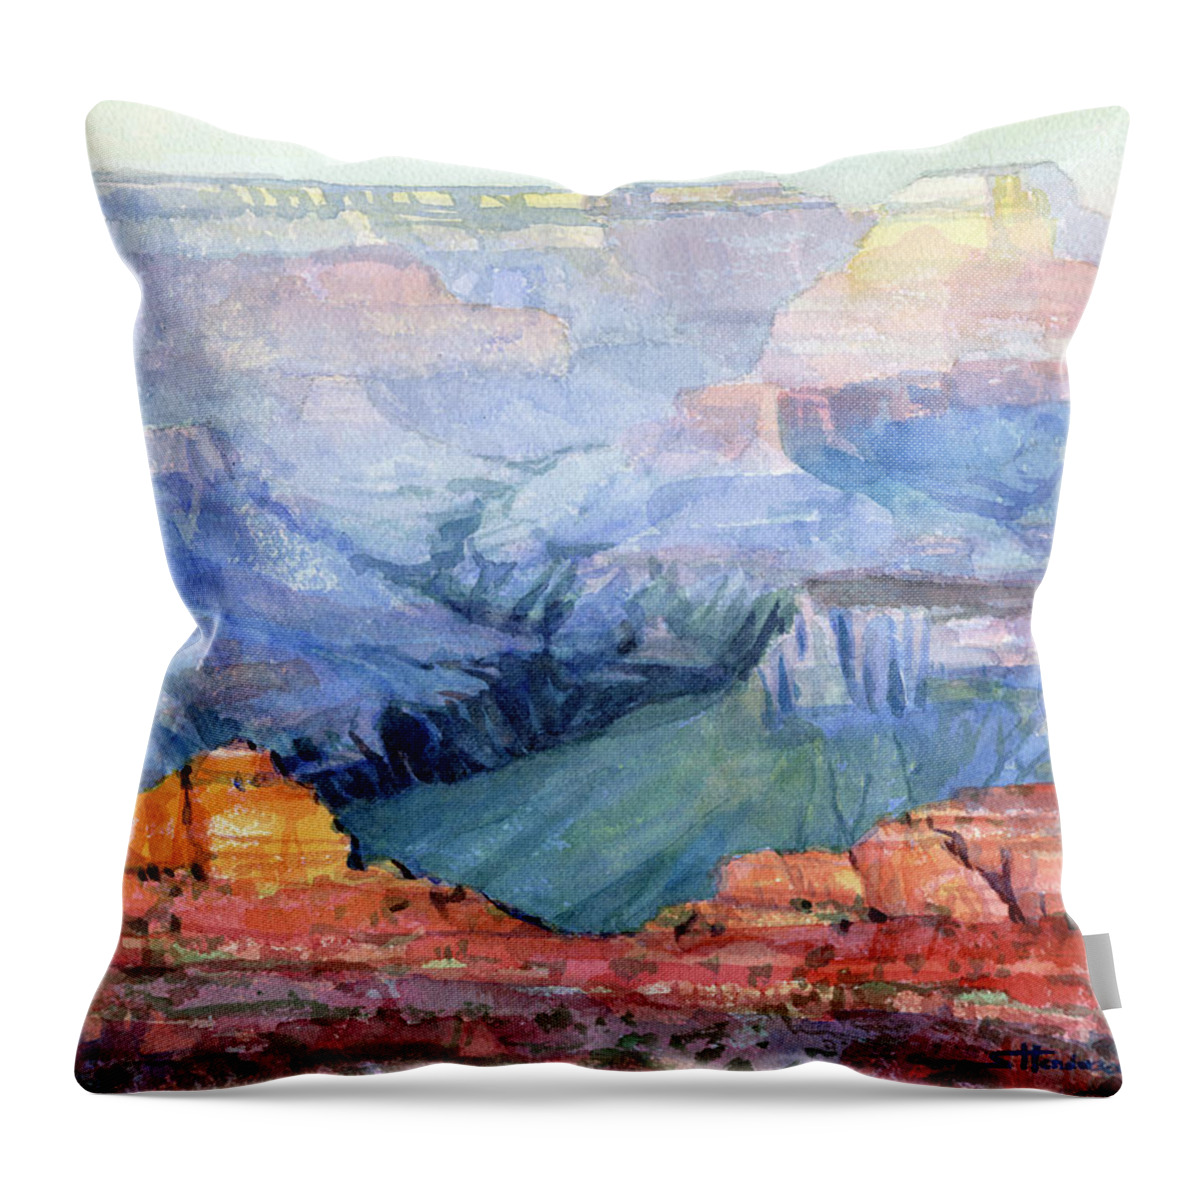 Grand Canyon Throw Pillow featuring the painting Many Hues by Steve Henderson